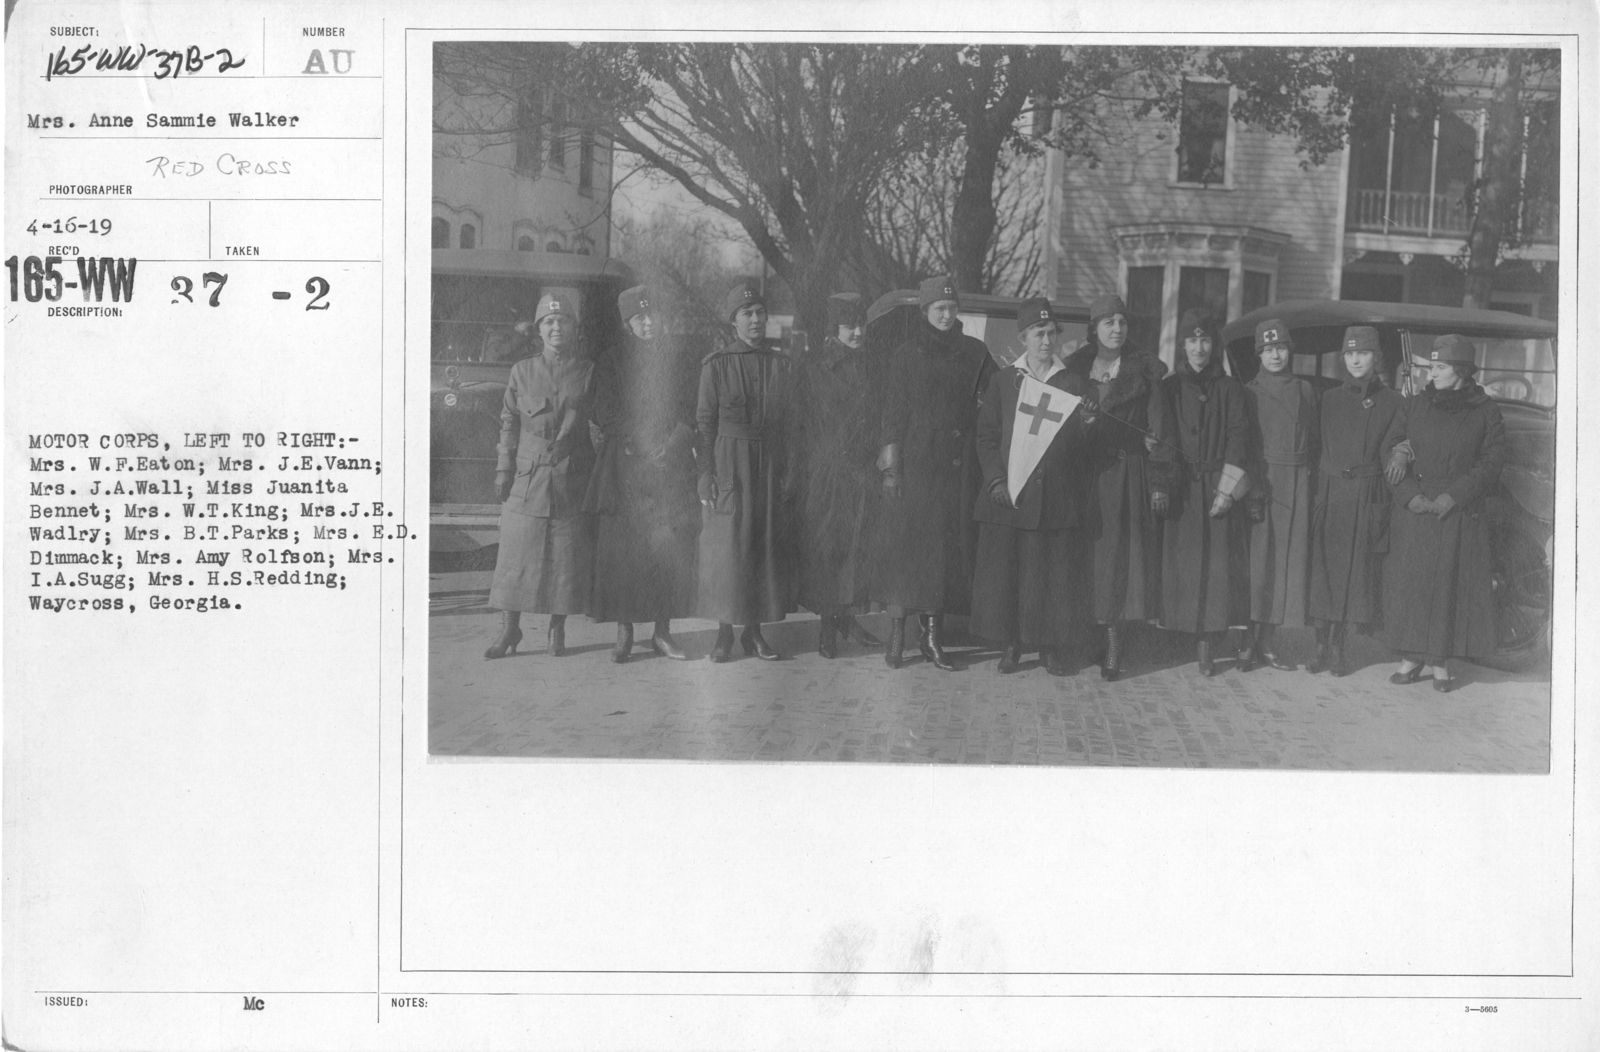 American Red Cross Motor Car Service Motor Corps Left To Right Mrs W F Eaton Mrs